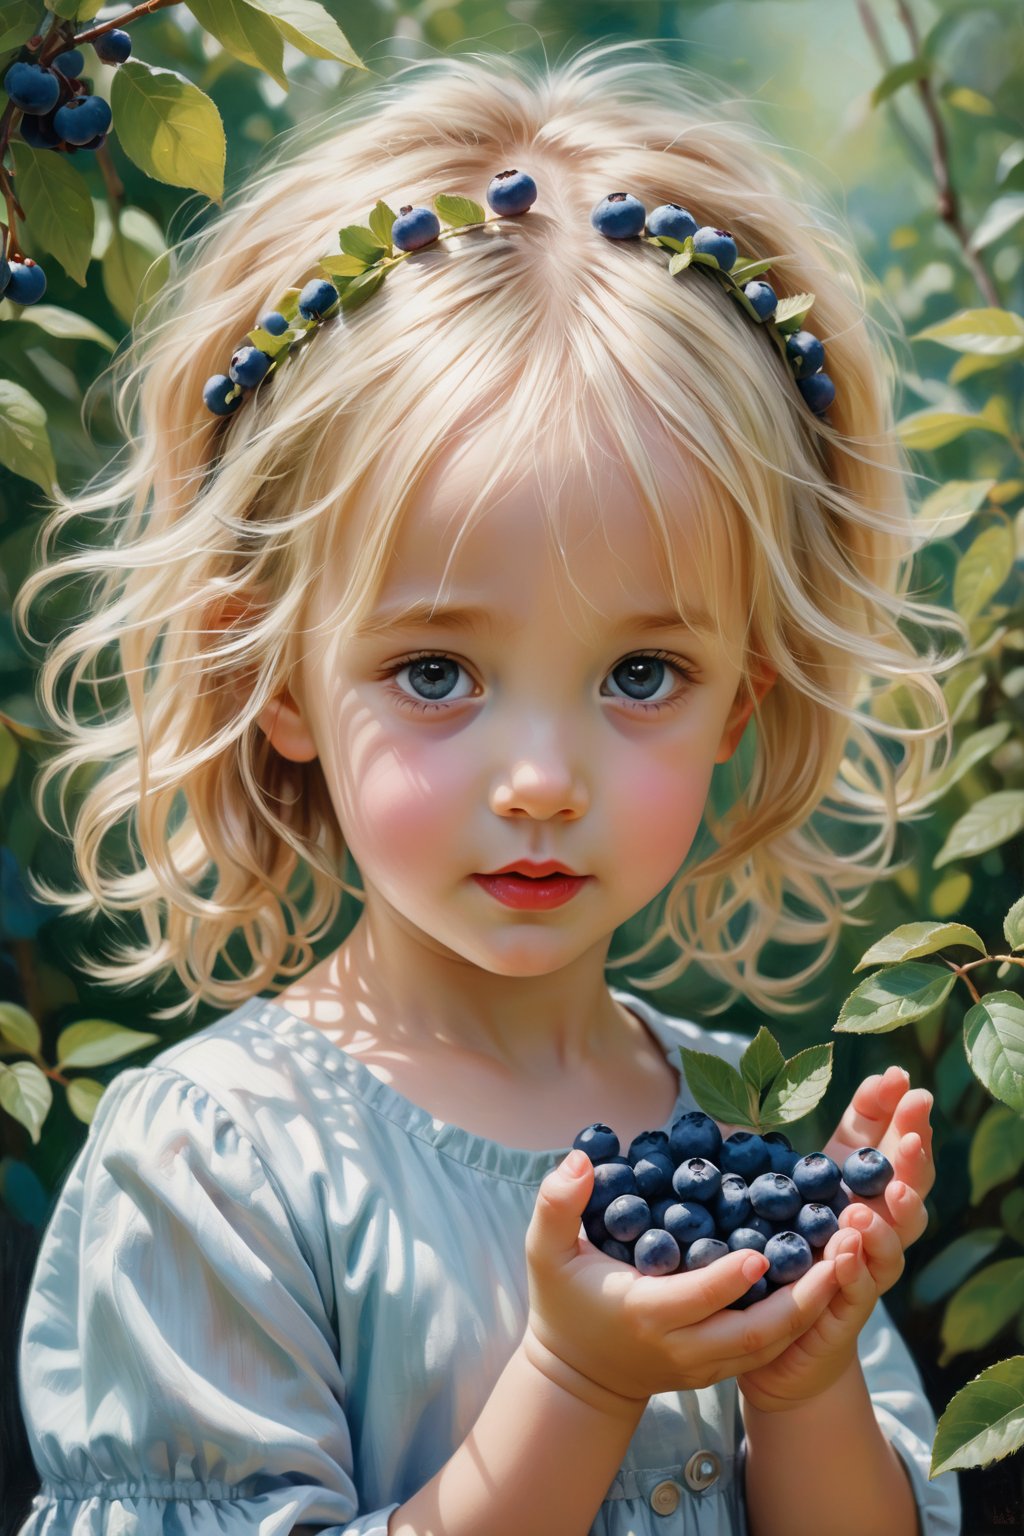 oilpainting of a little girl with messy blond hair, she is holding up her hand filled with blueberries, soft muted colors, bg greenery, highly detailed, higly realistic, whimsical,More Reasonable Details,aesthetic portrait